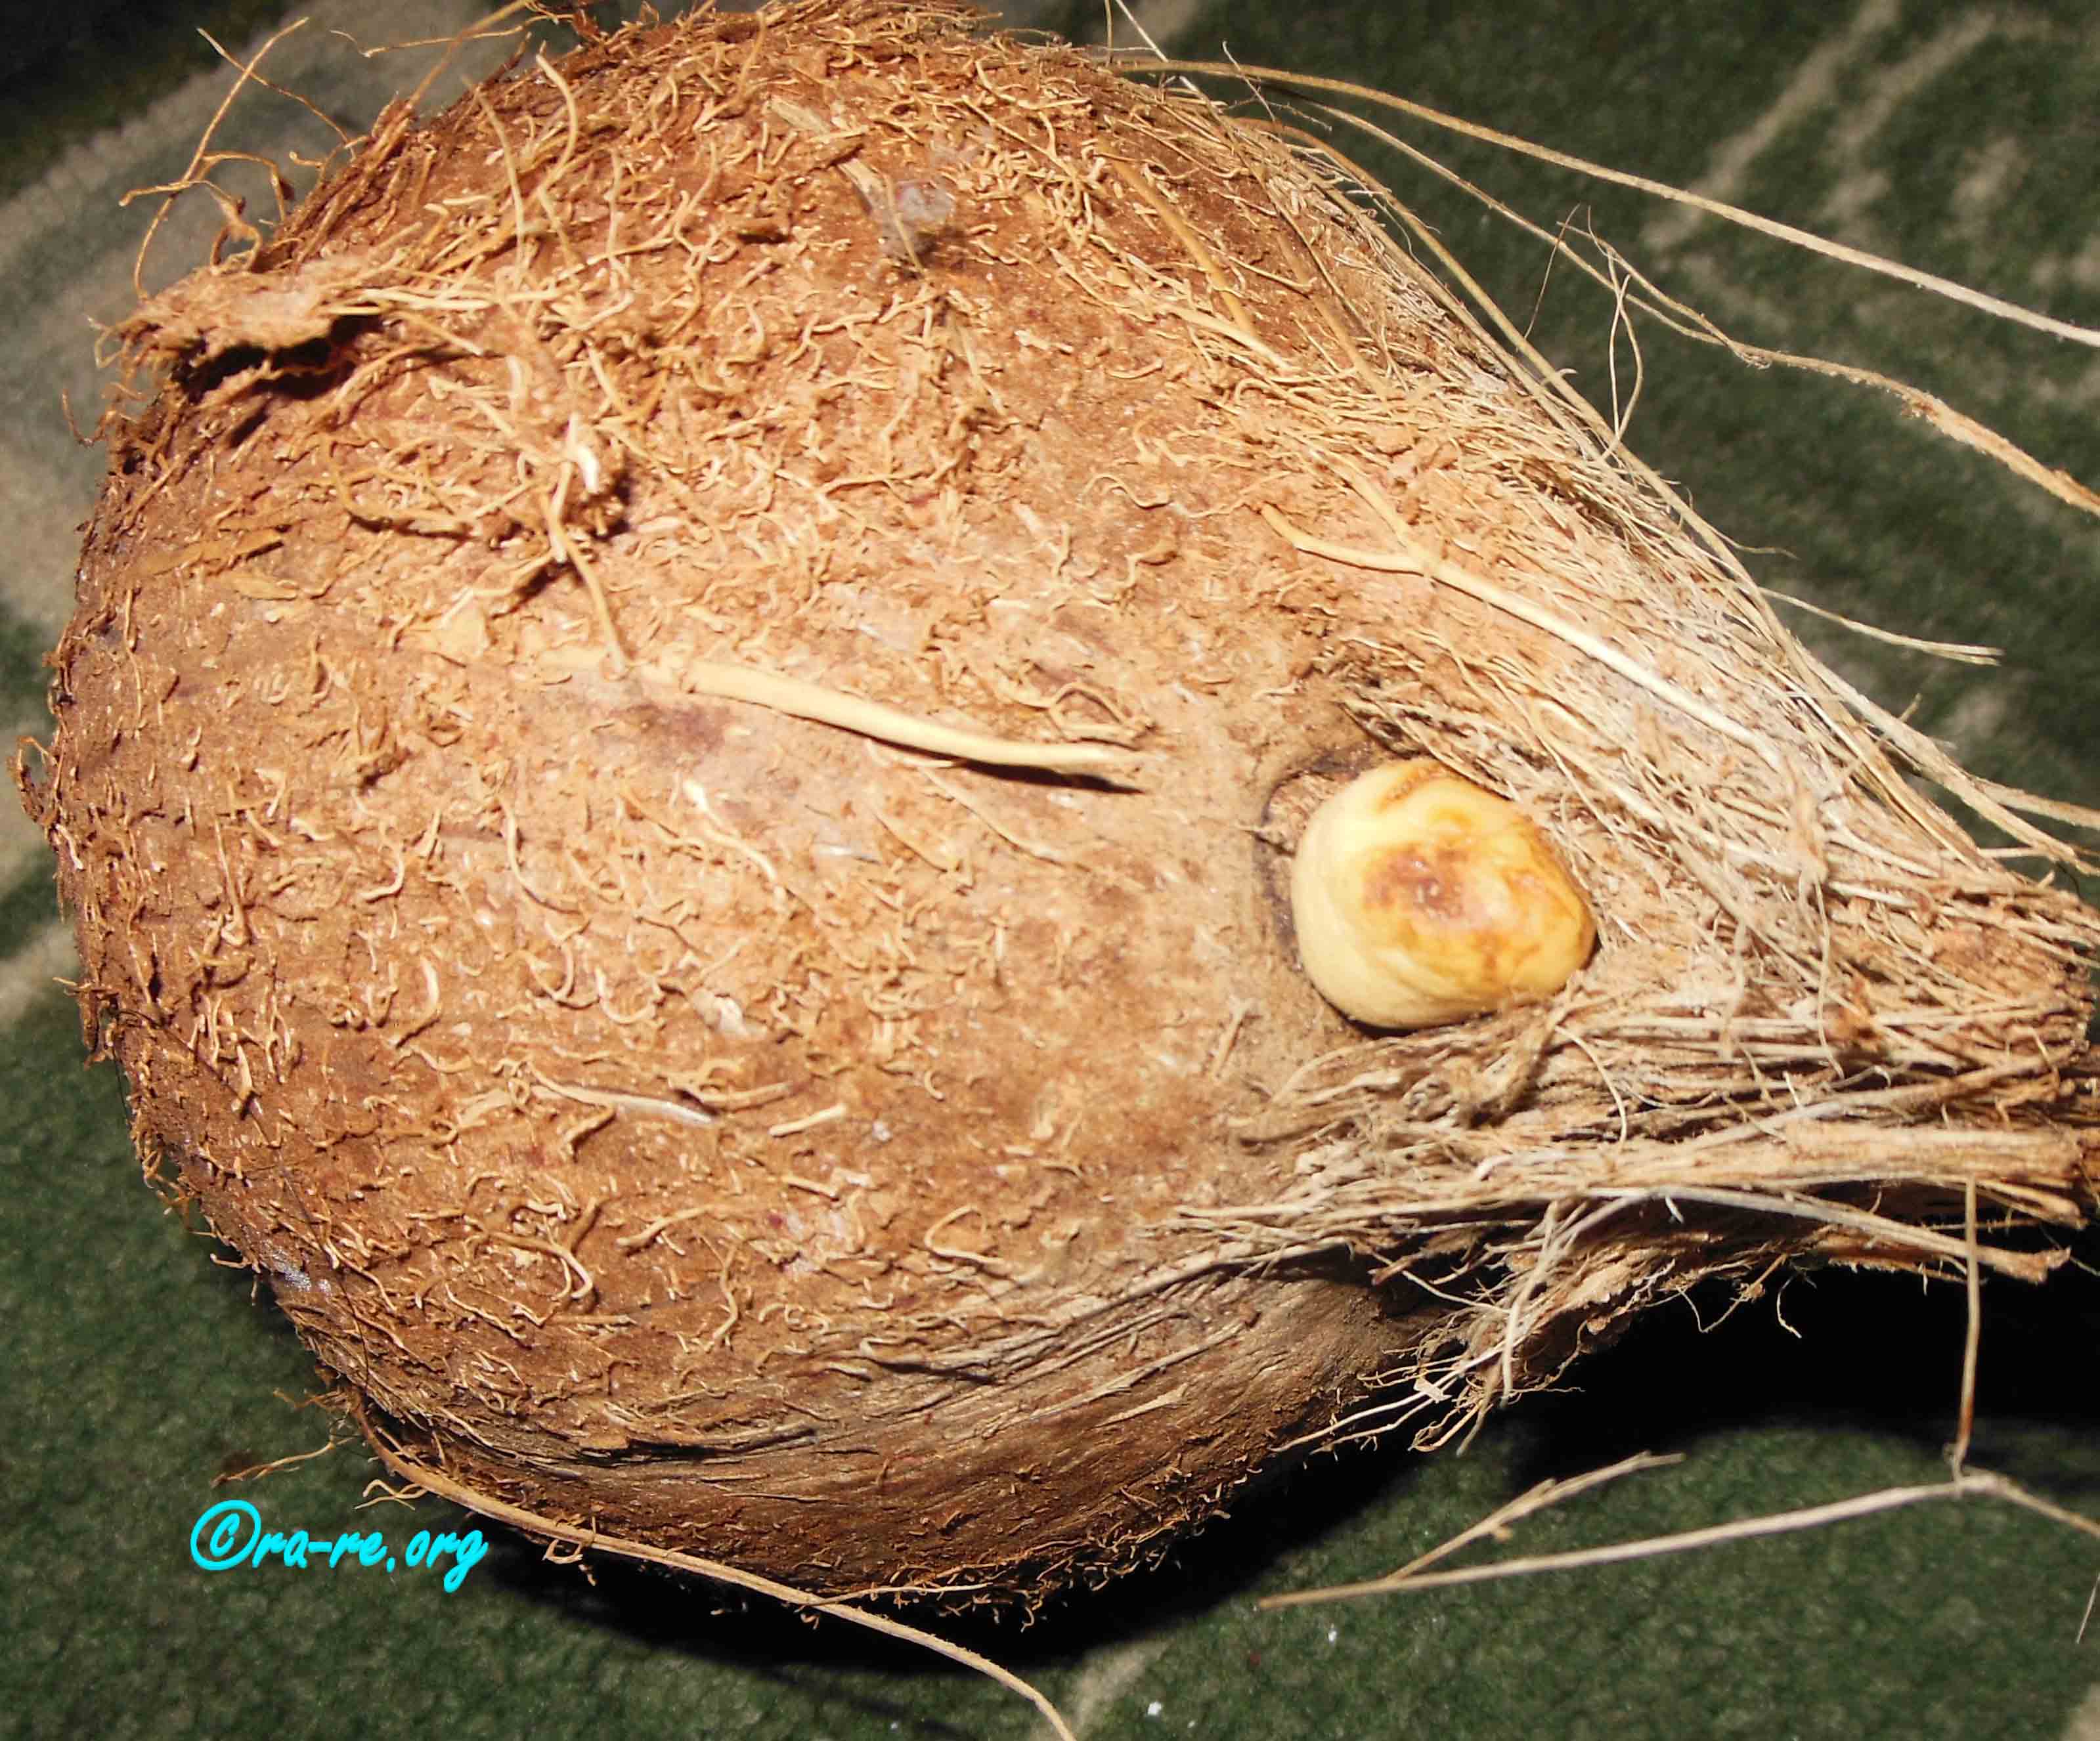 coconut-with-husk-also-germinating